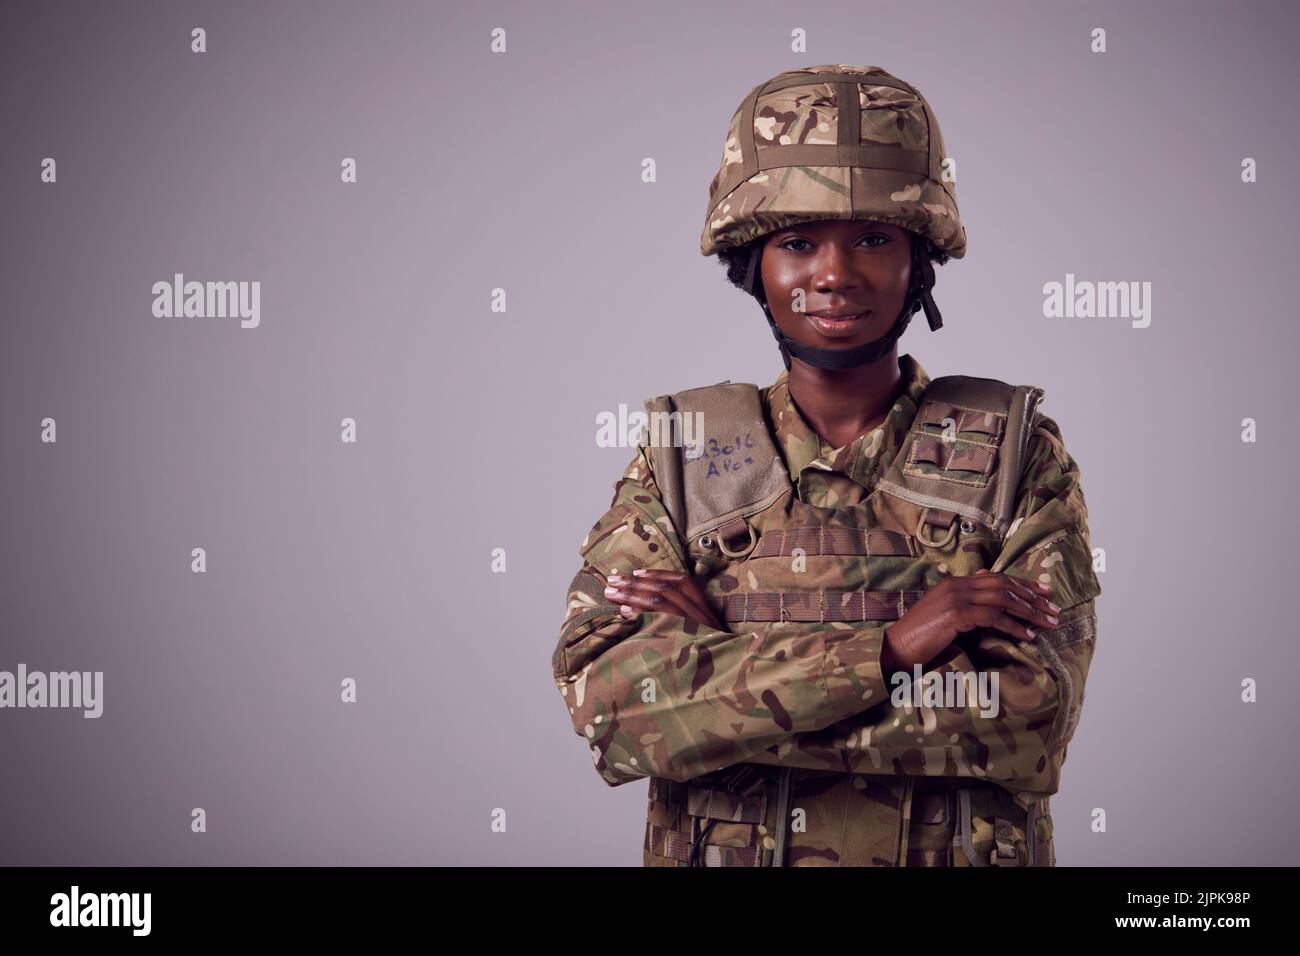 smiling, soldier, army, camouflage clothing, person of color, berufsporträt, smile, soldiers, troops, armies Stock Photo